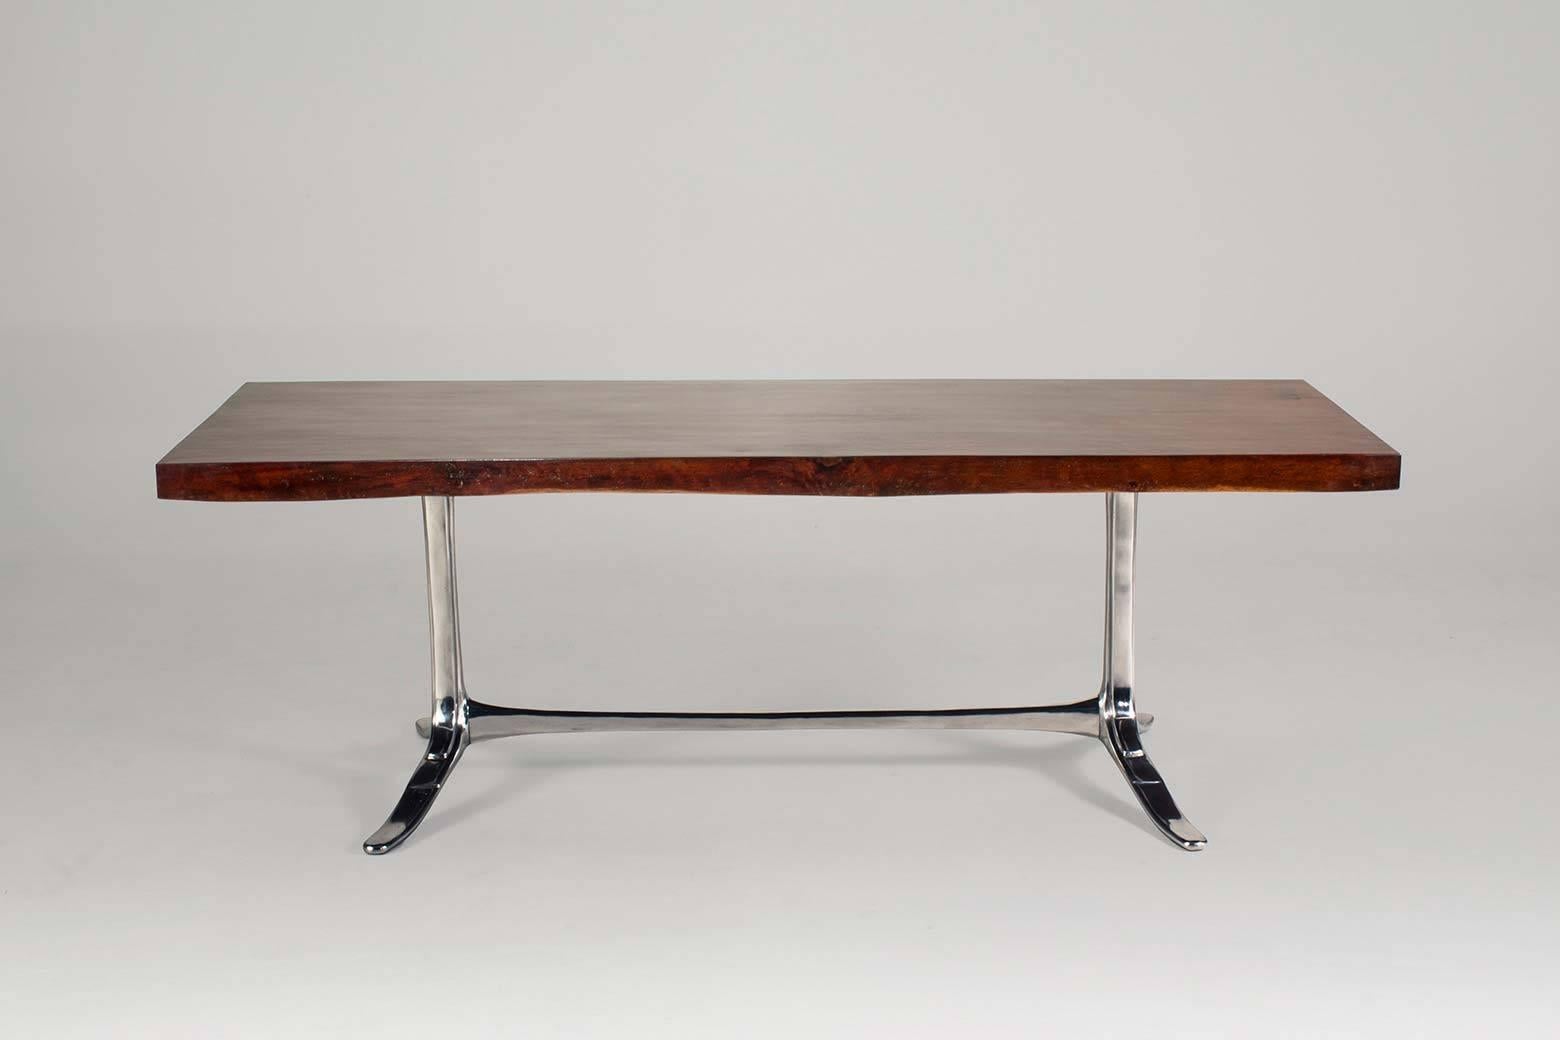 Minimalist Bespoke Table Made with Single Slab of Antique Reclaimed Wood by P. Tendercool For Sale